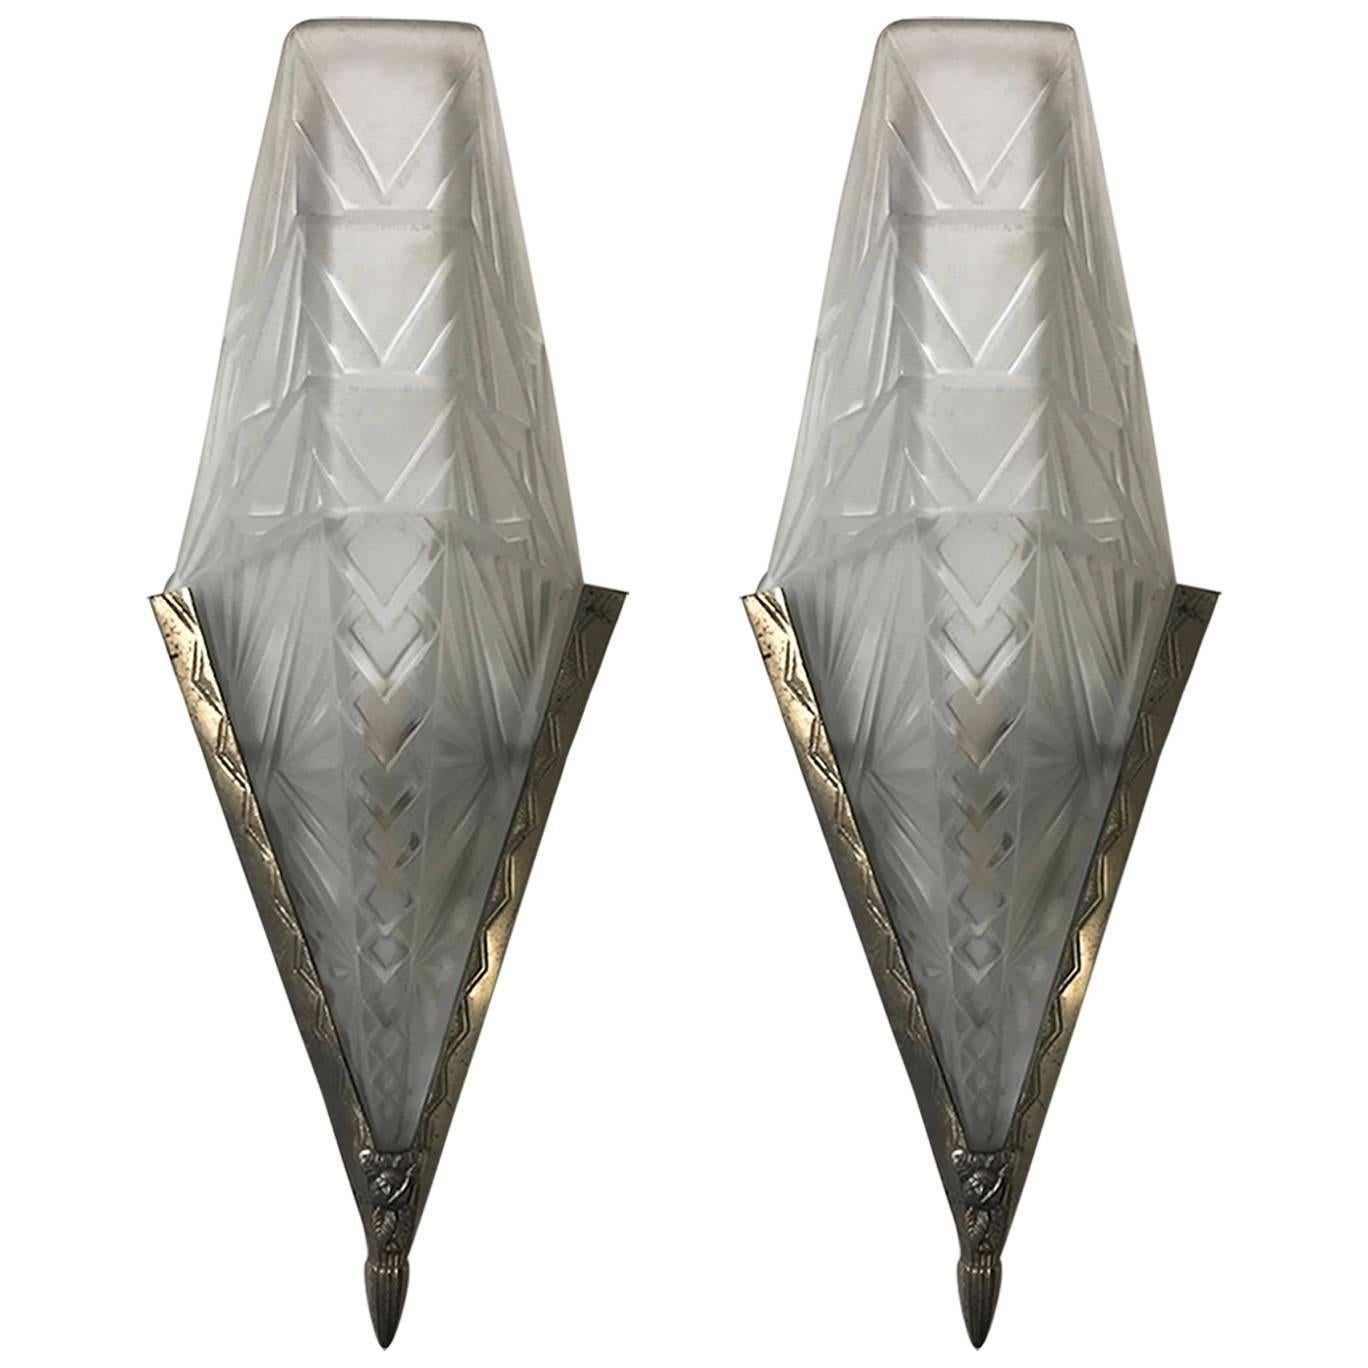 Pair of French Art Deco Geometric Wall Sconces by E.J.G.